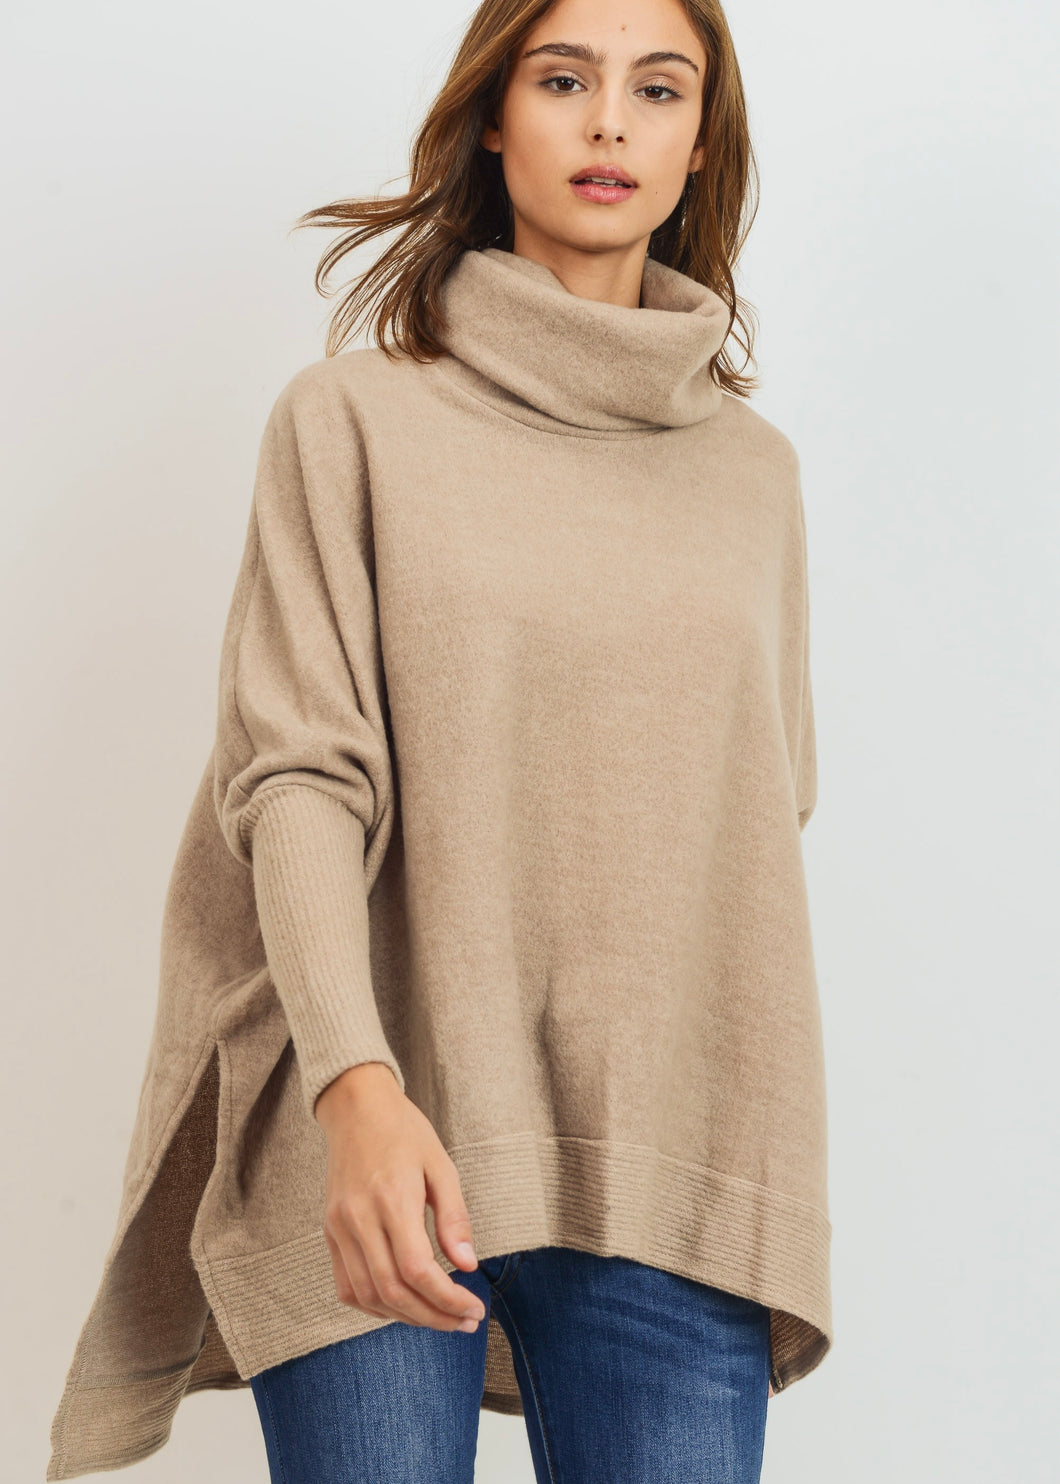 Montana Brushed Knit Turtle Neck (2 Colors)